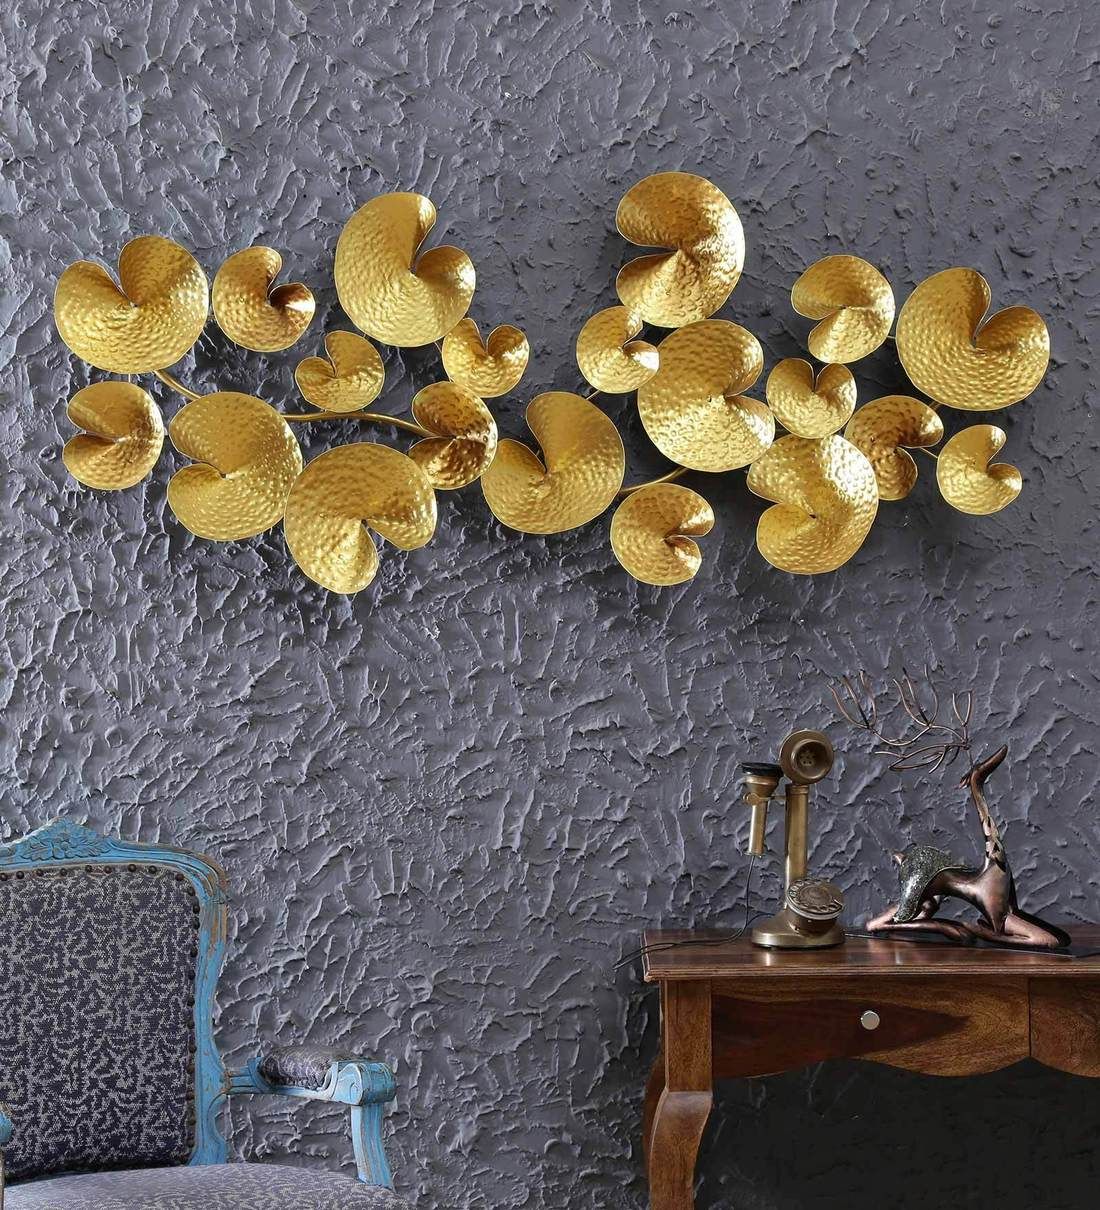 Buy Wrought Iron Abstract Wall Art In Goldmalik Design Online –  Abstract Metal Art – Metal Wall Art – Home Decor – Pepperfry Product With Regard To Golden Wall Art (View 12 of 15)